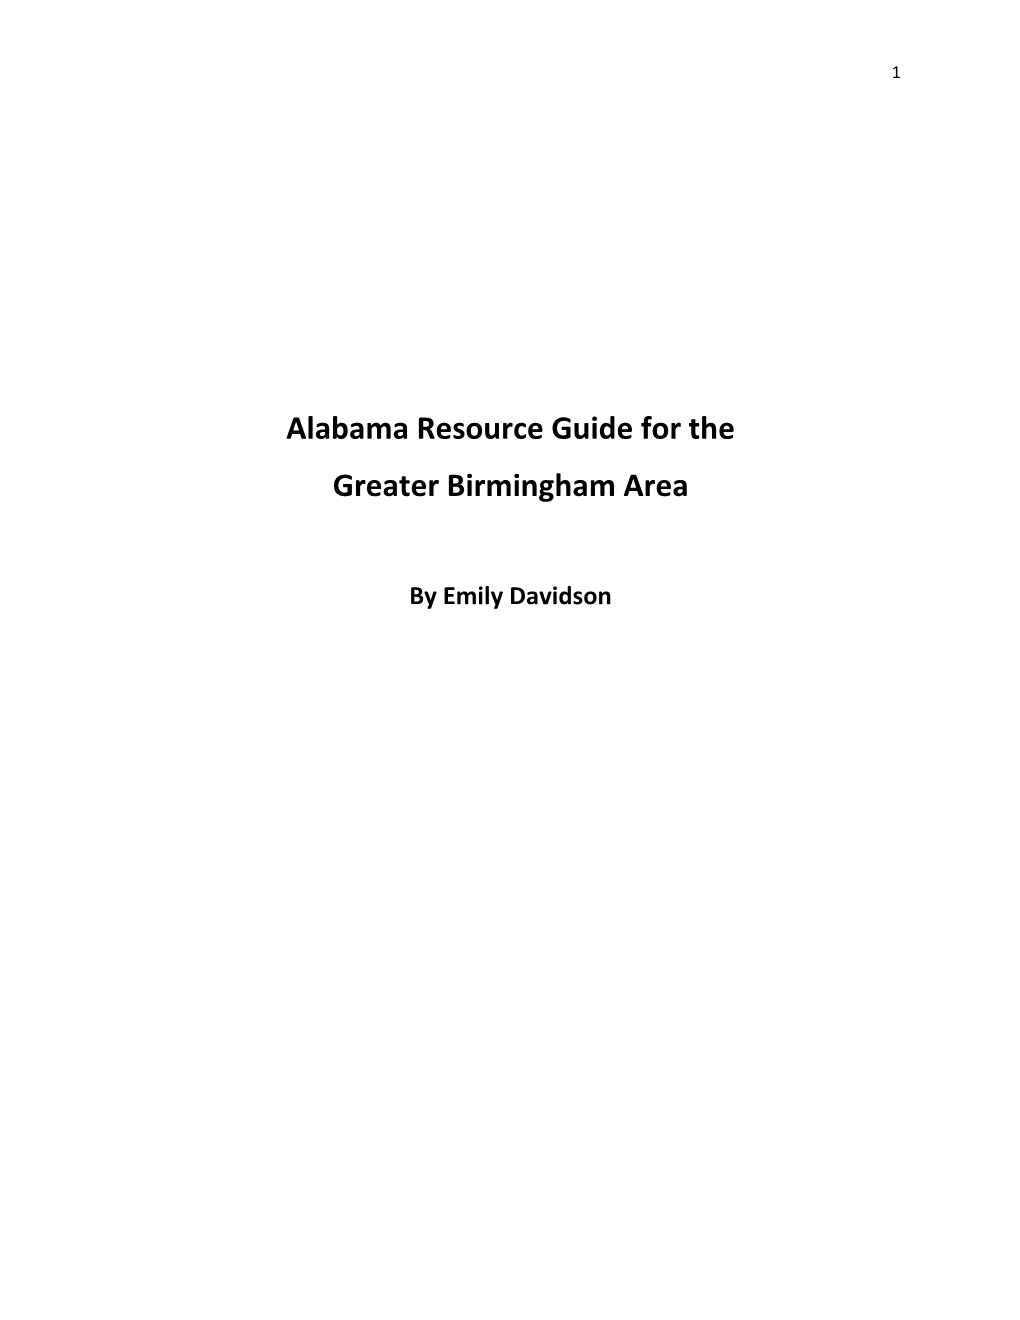 Alabama Resource Guide for the Greater Birmingham Area